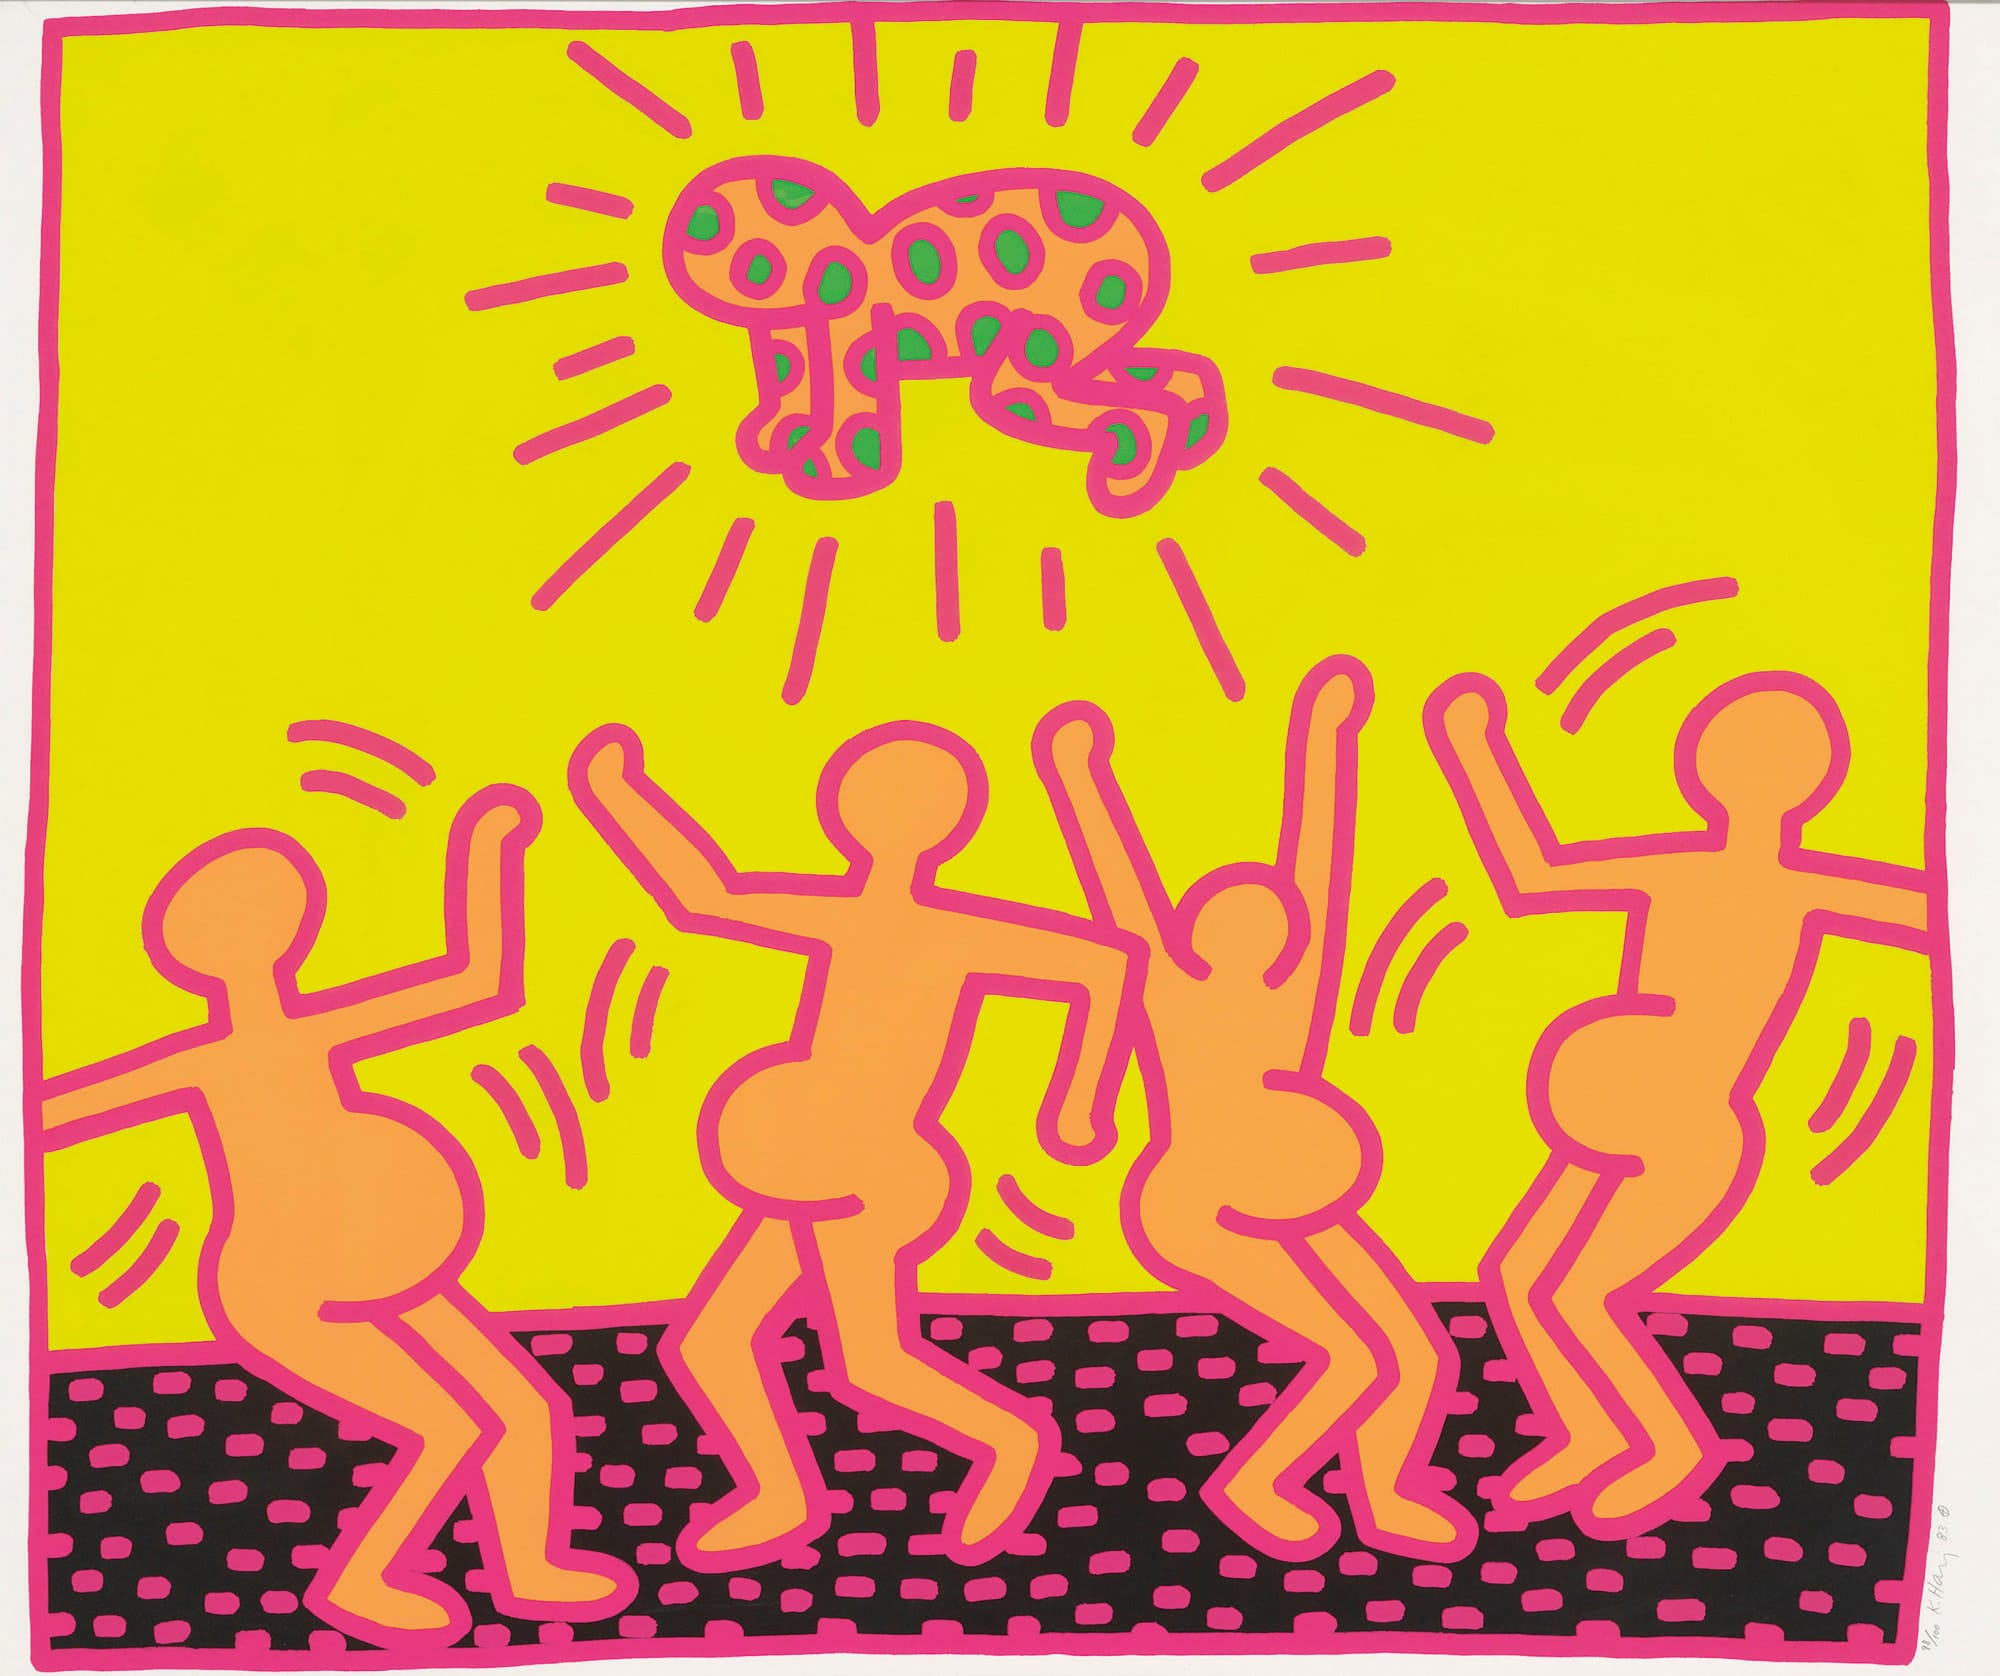 Keith Haring 30 Years On, February 16th marks the 30th anniversary of Keith Haring's death. Here's how he changed the...